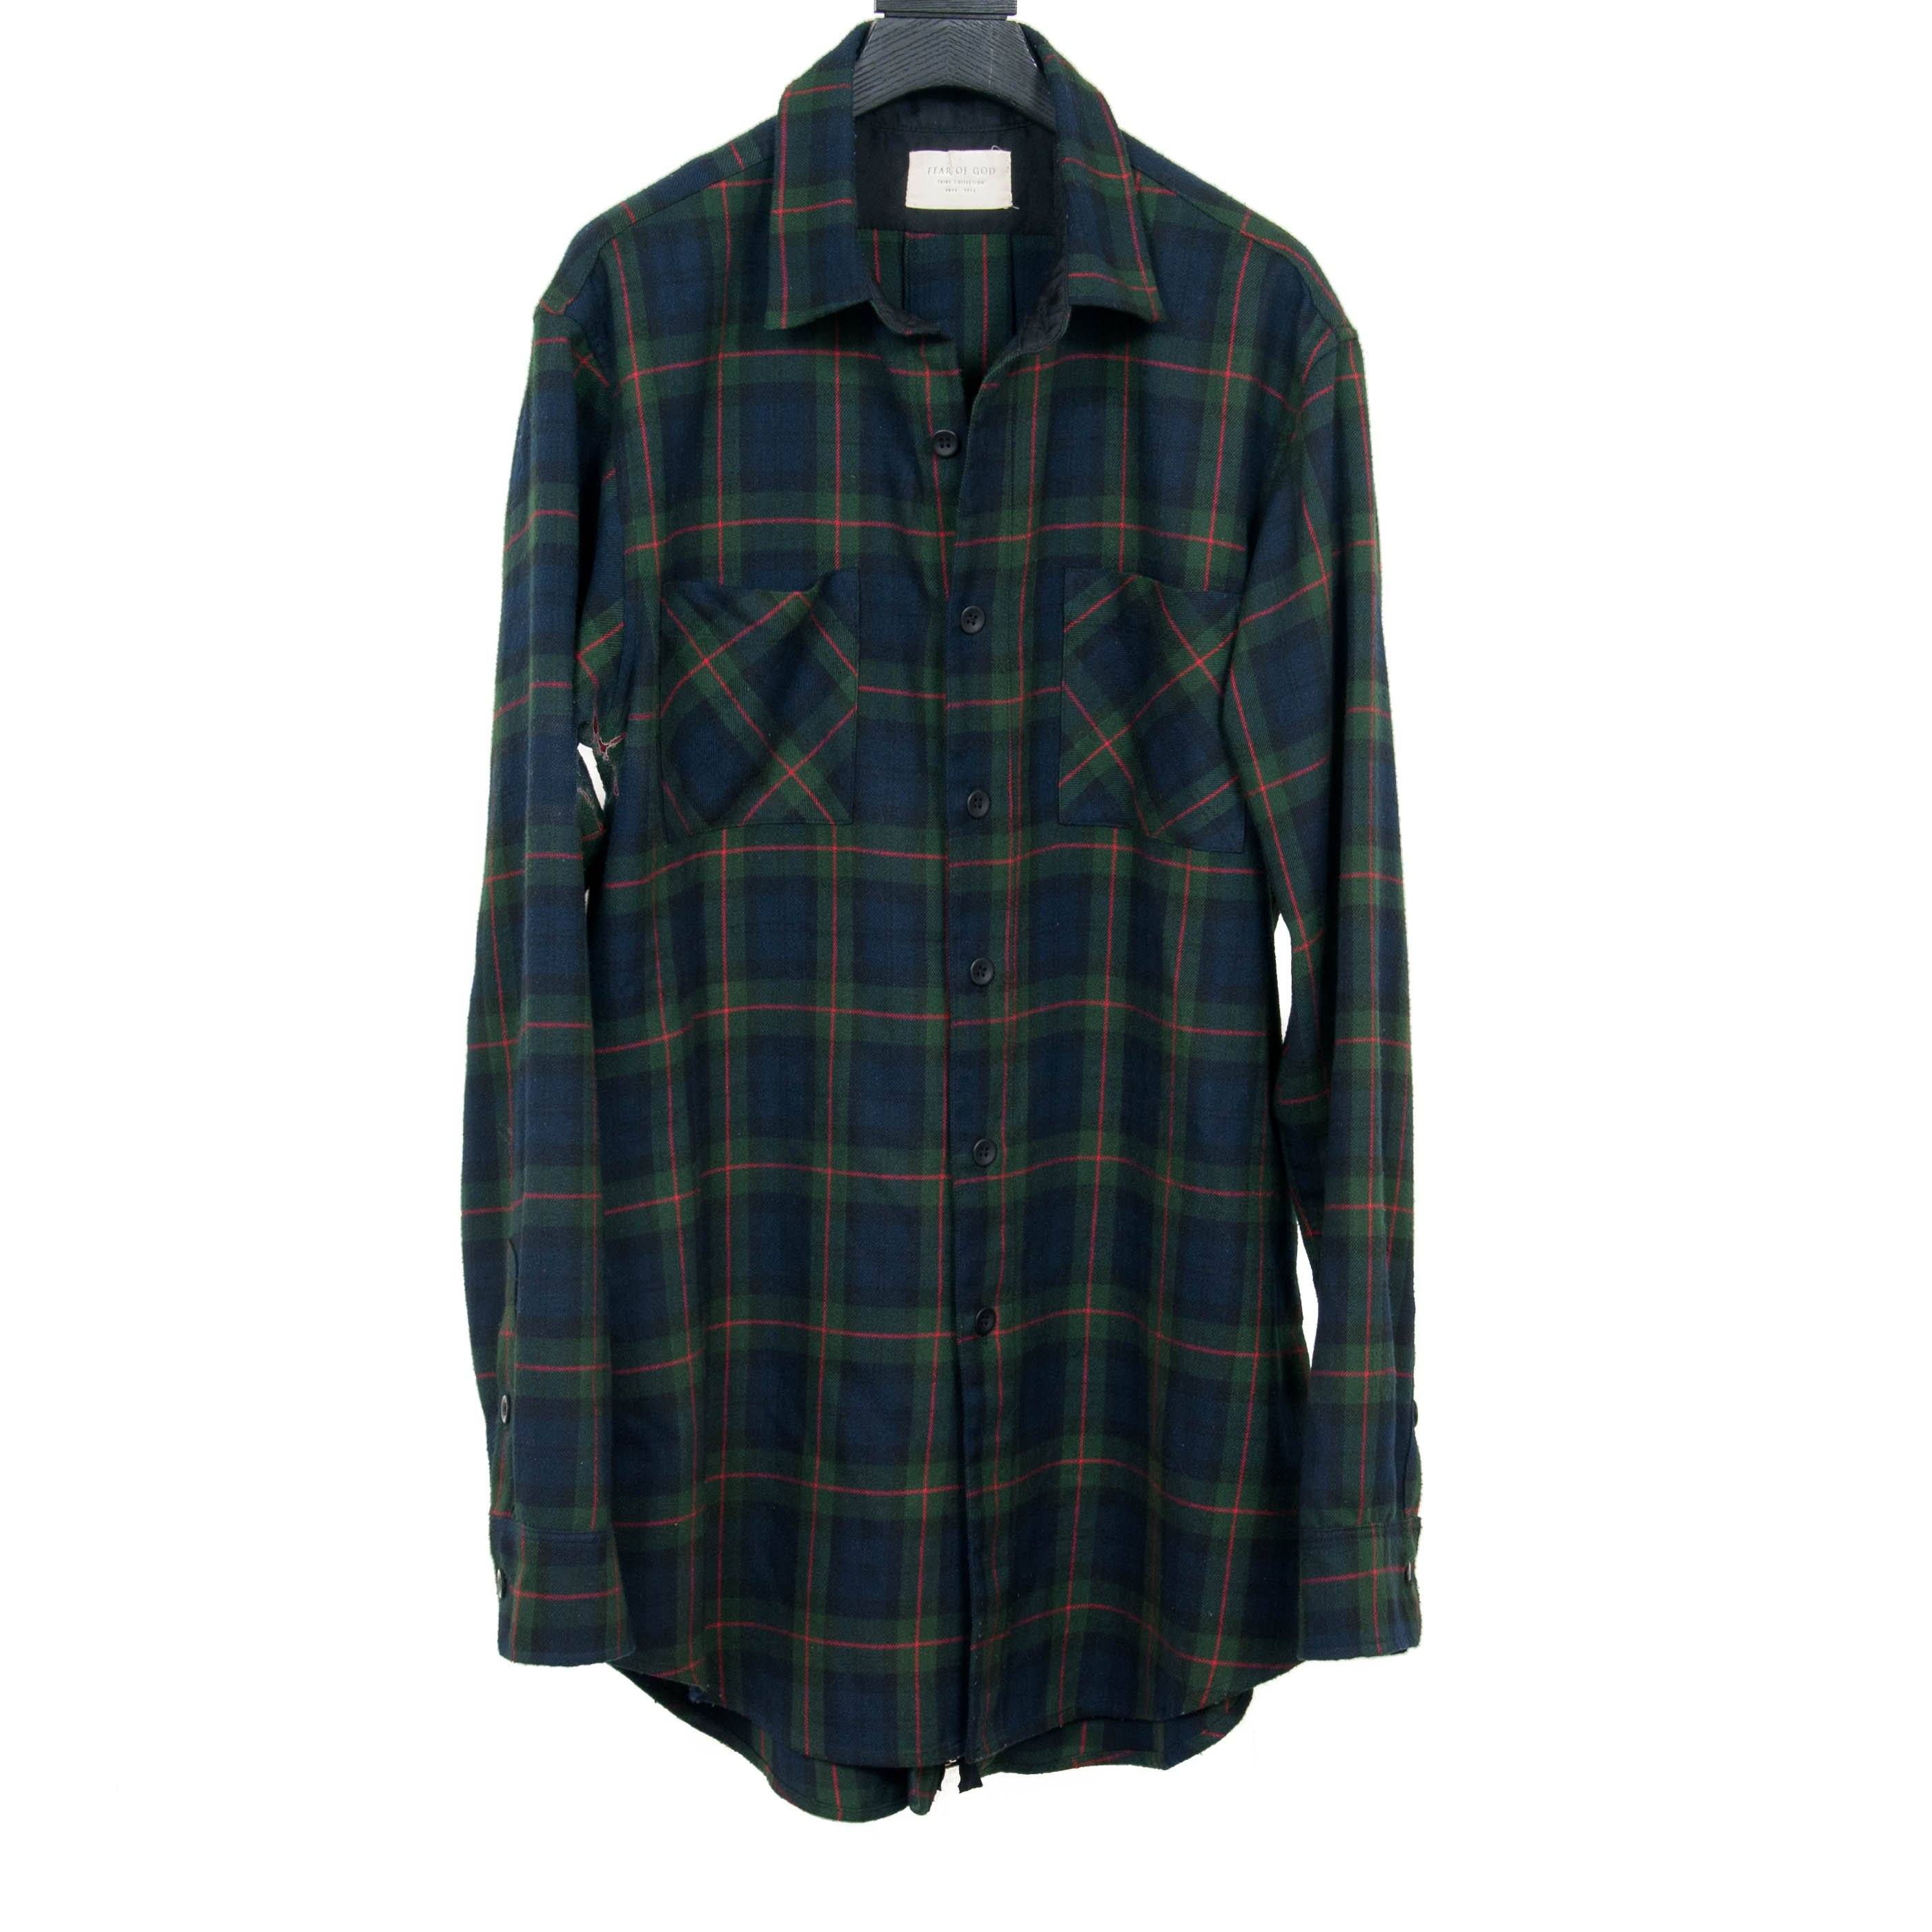 Third Collection Flannel